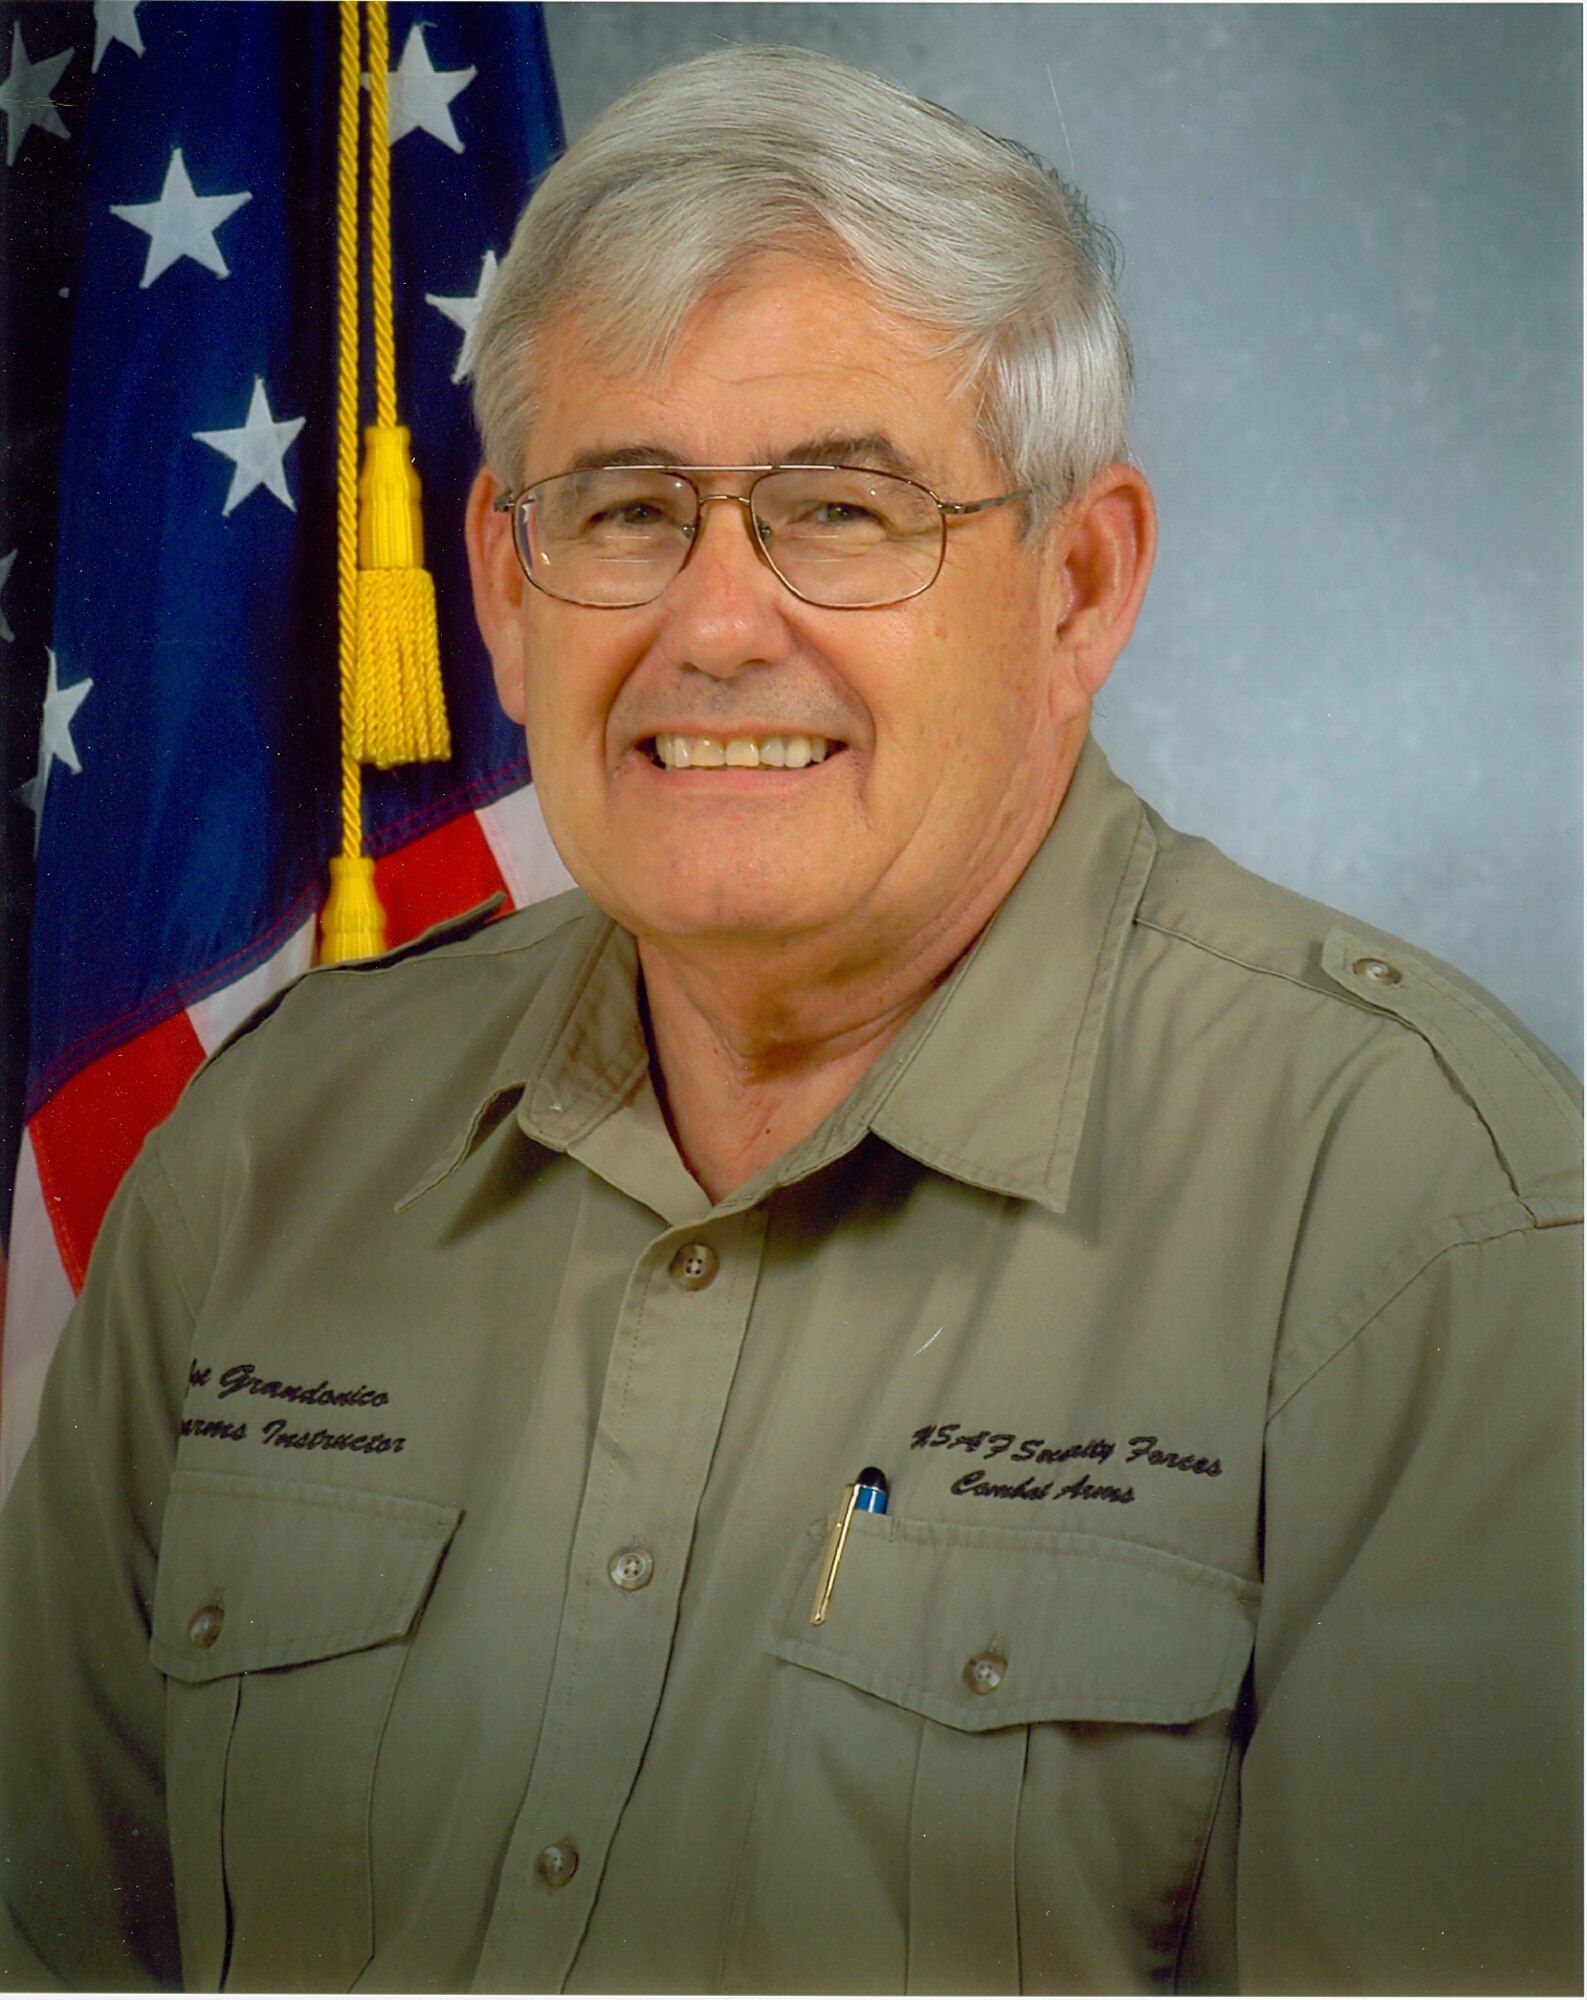 Joe Grandonico, who passed away Feb. 23, was a 12 year veteran of the 45th Security Forces Squadron as a civil service weapons instructor. (U.S. Air Force photo courtesy of the 45th Security Forces Squadron)